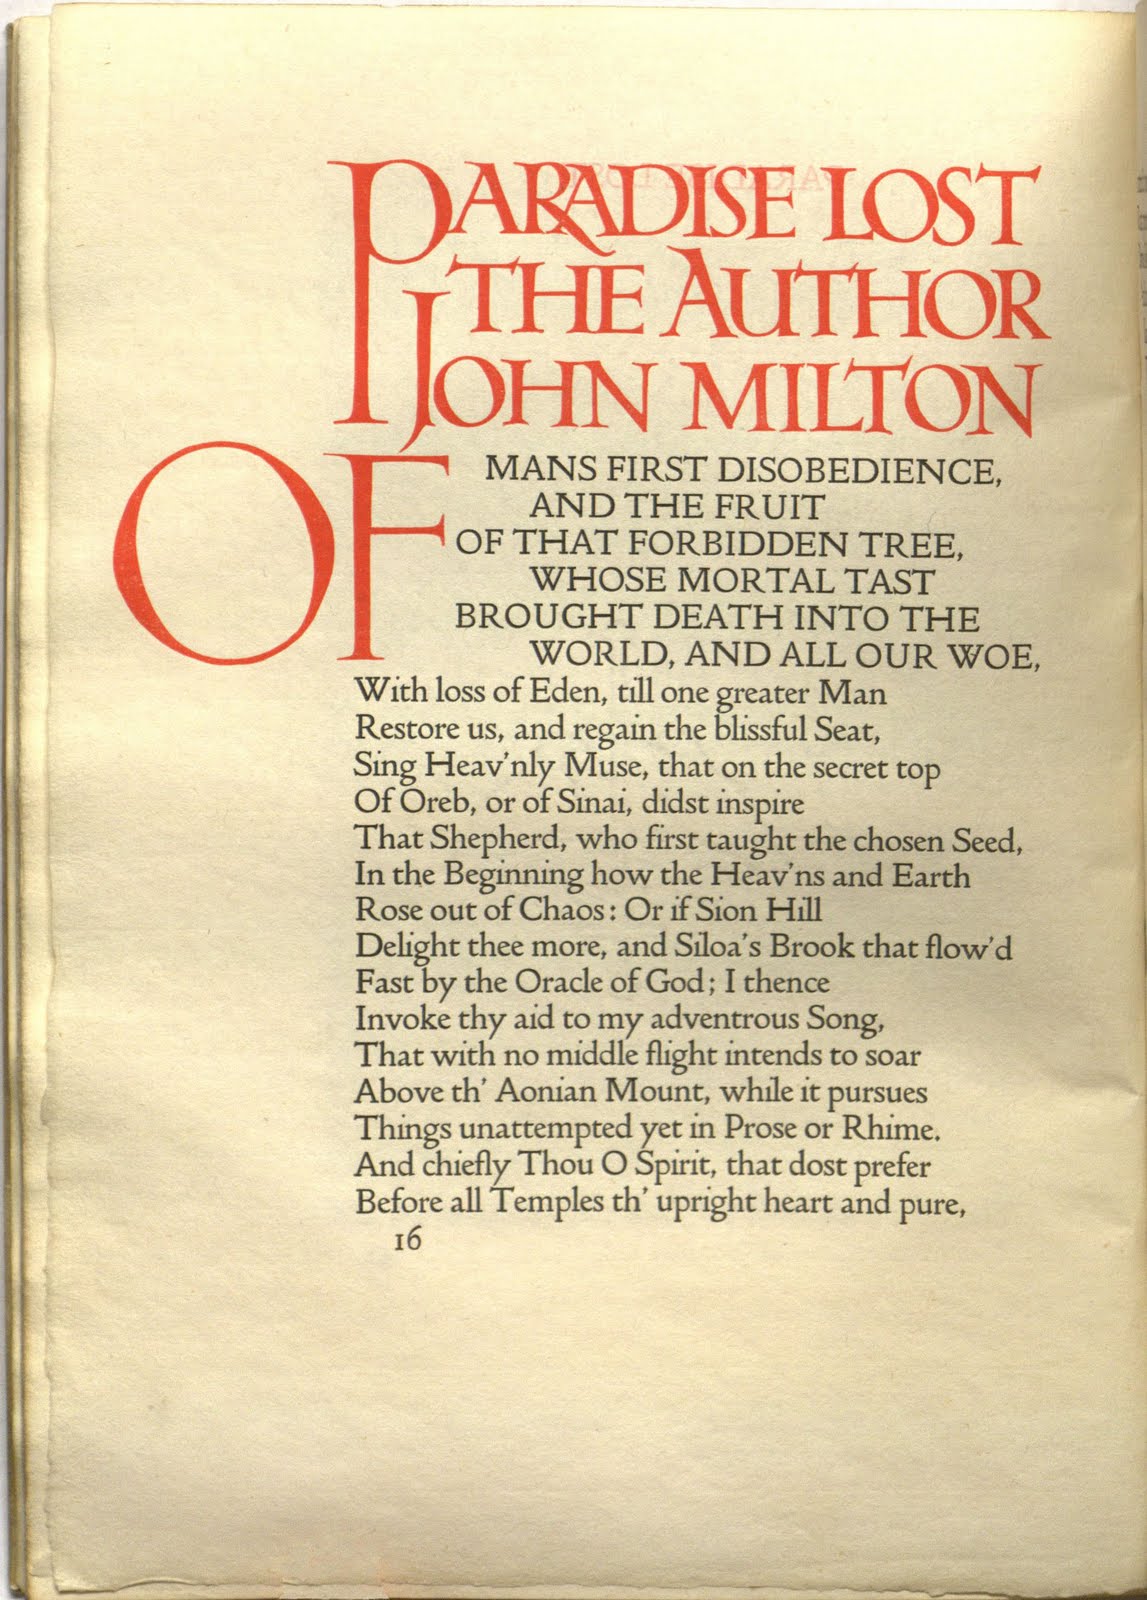 Excerpt from John Milton's Paradise Lost with title, author and first word in oversized orange type.